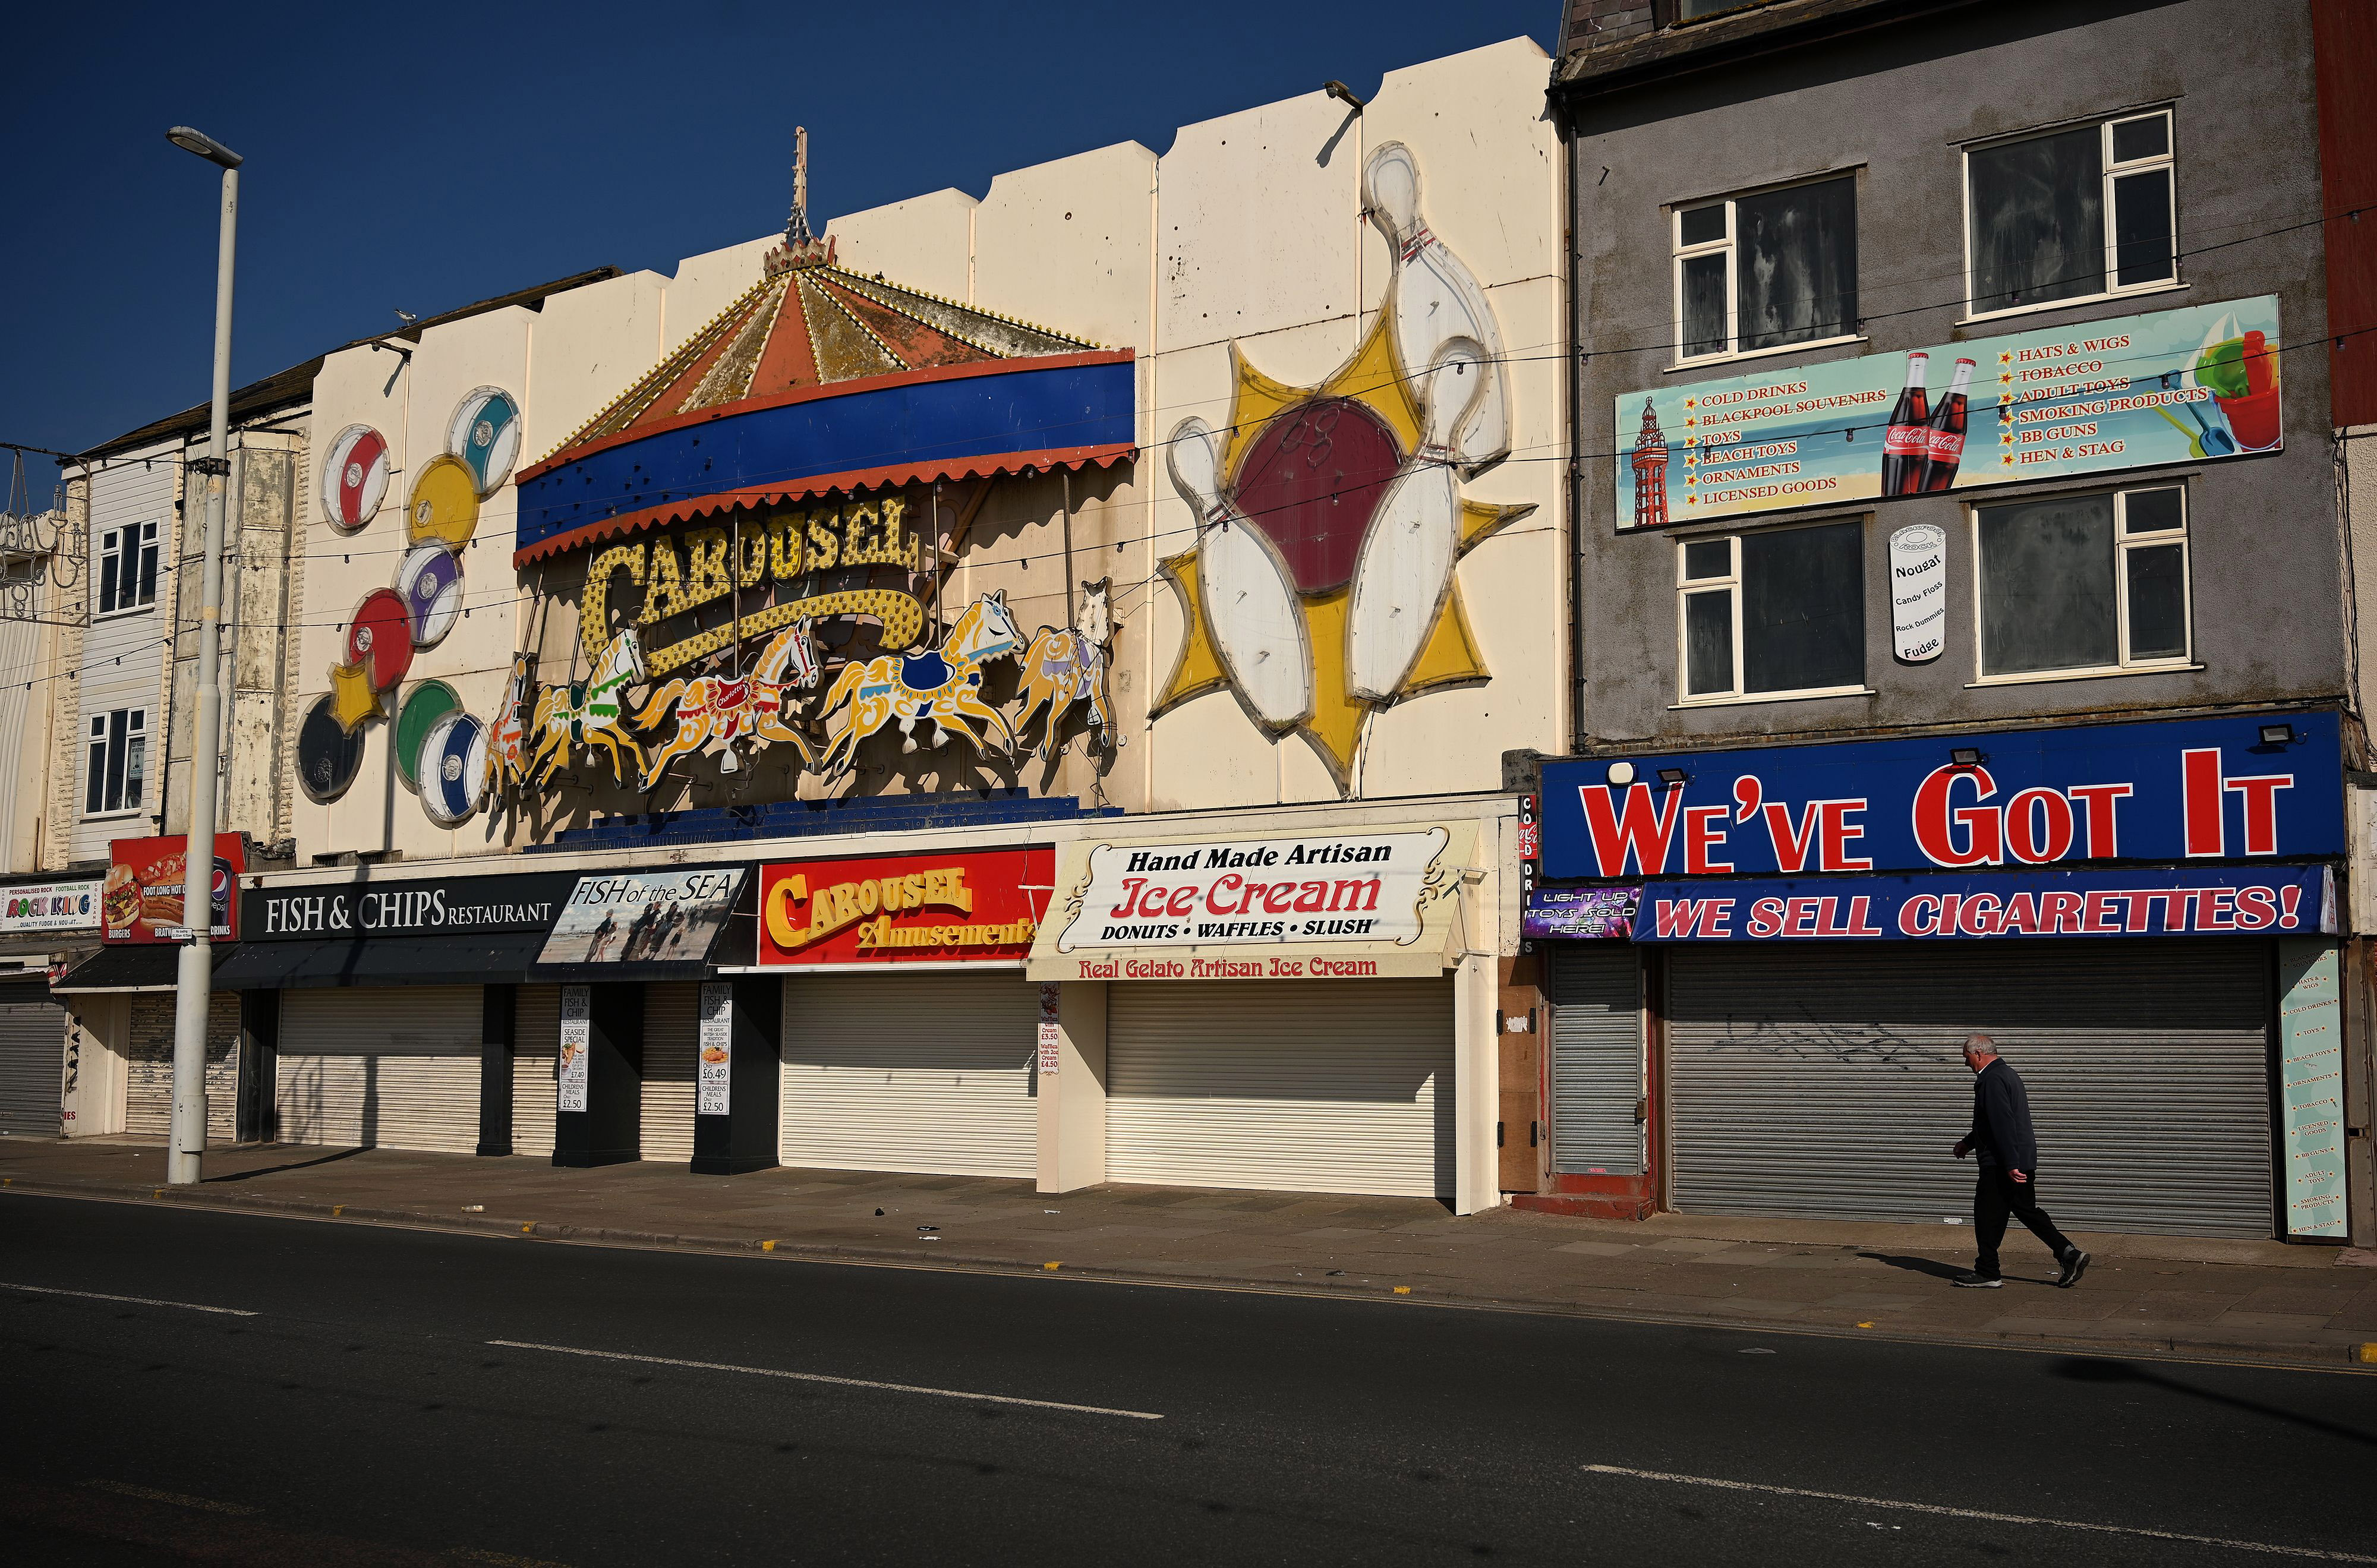 A man walks by shuttered businesses, all closed due to Covid-19 restrictions, in Blackpool, England, on April 13.